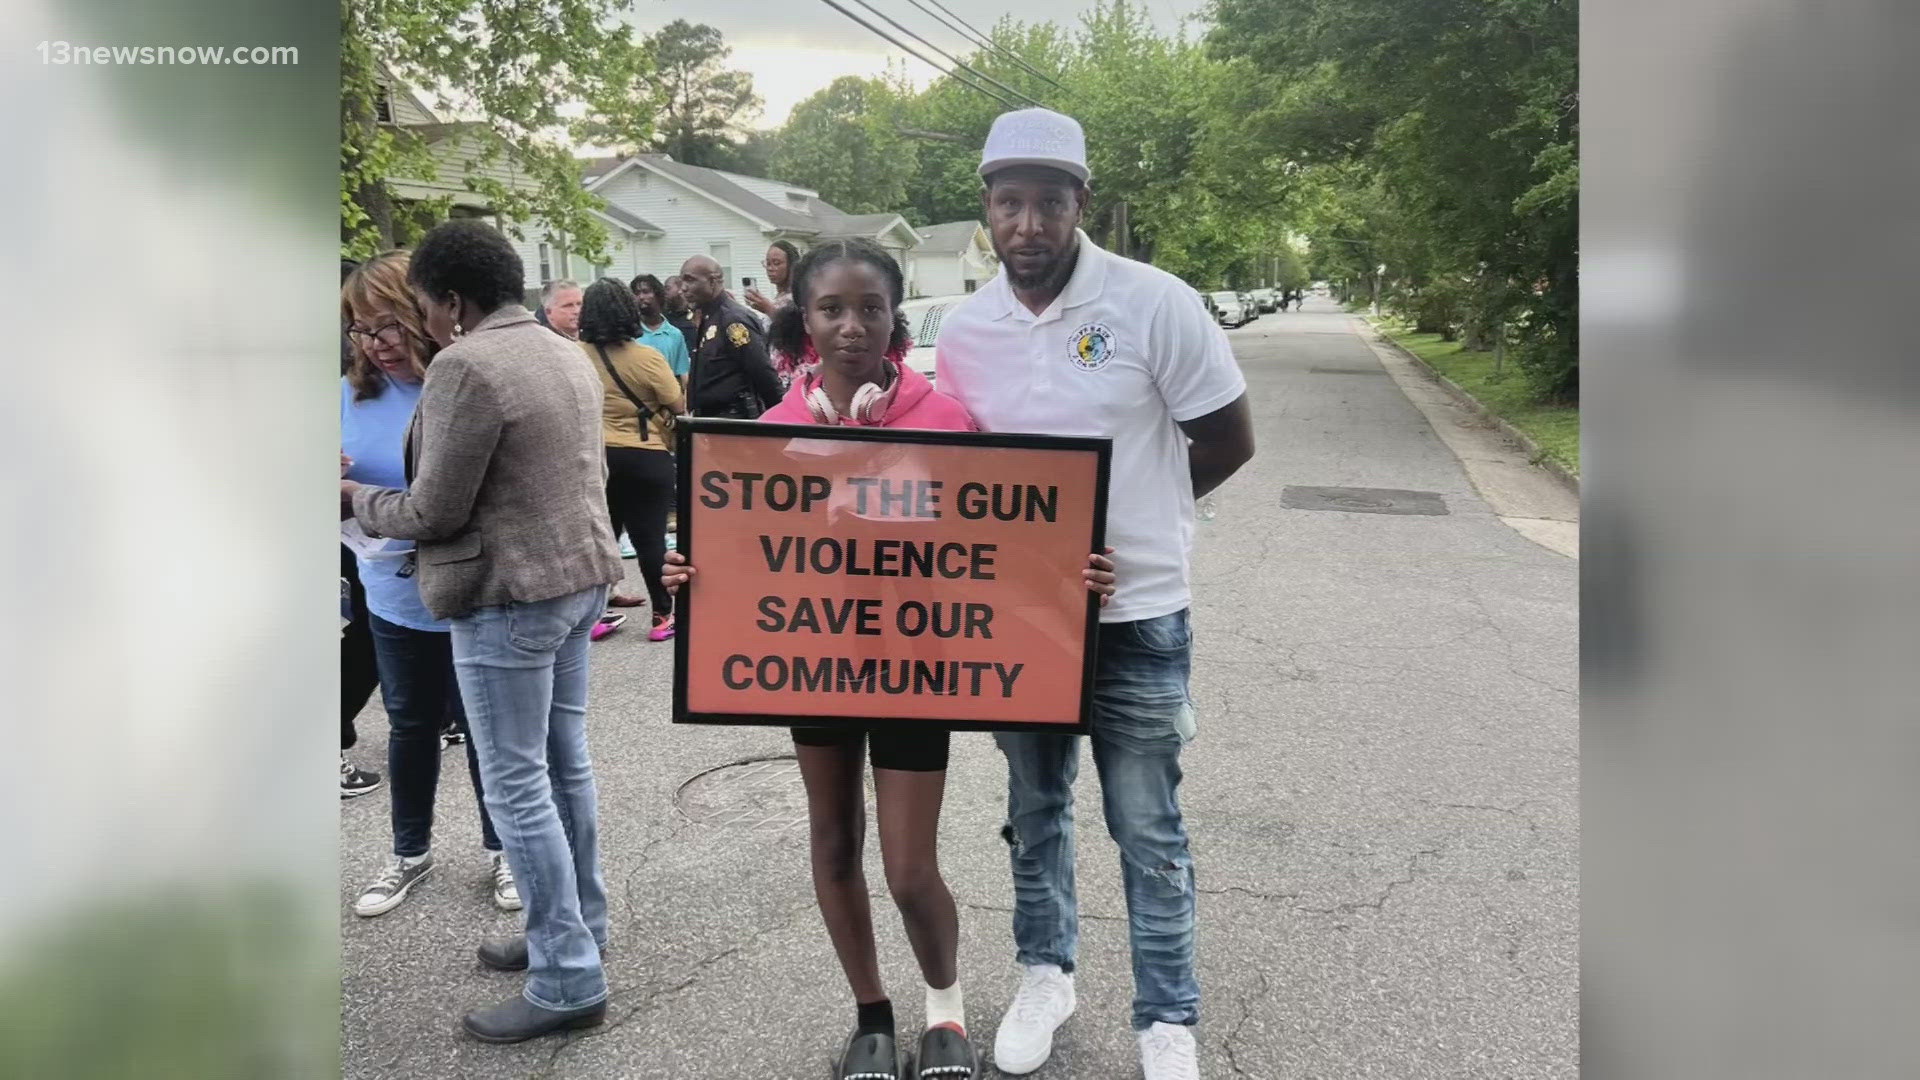 Norfolk and Portsmouth were named to receive at least $3 million of the budget, due to disproportionate firearm-related homicides compared to their populations.